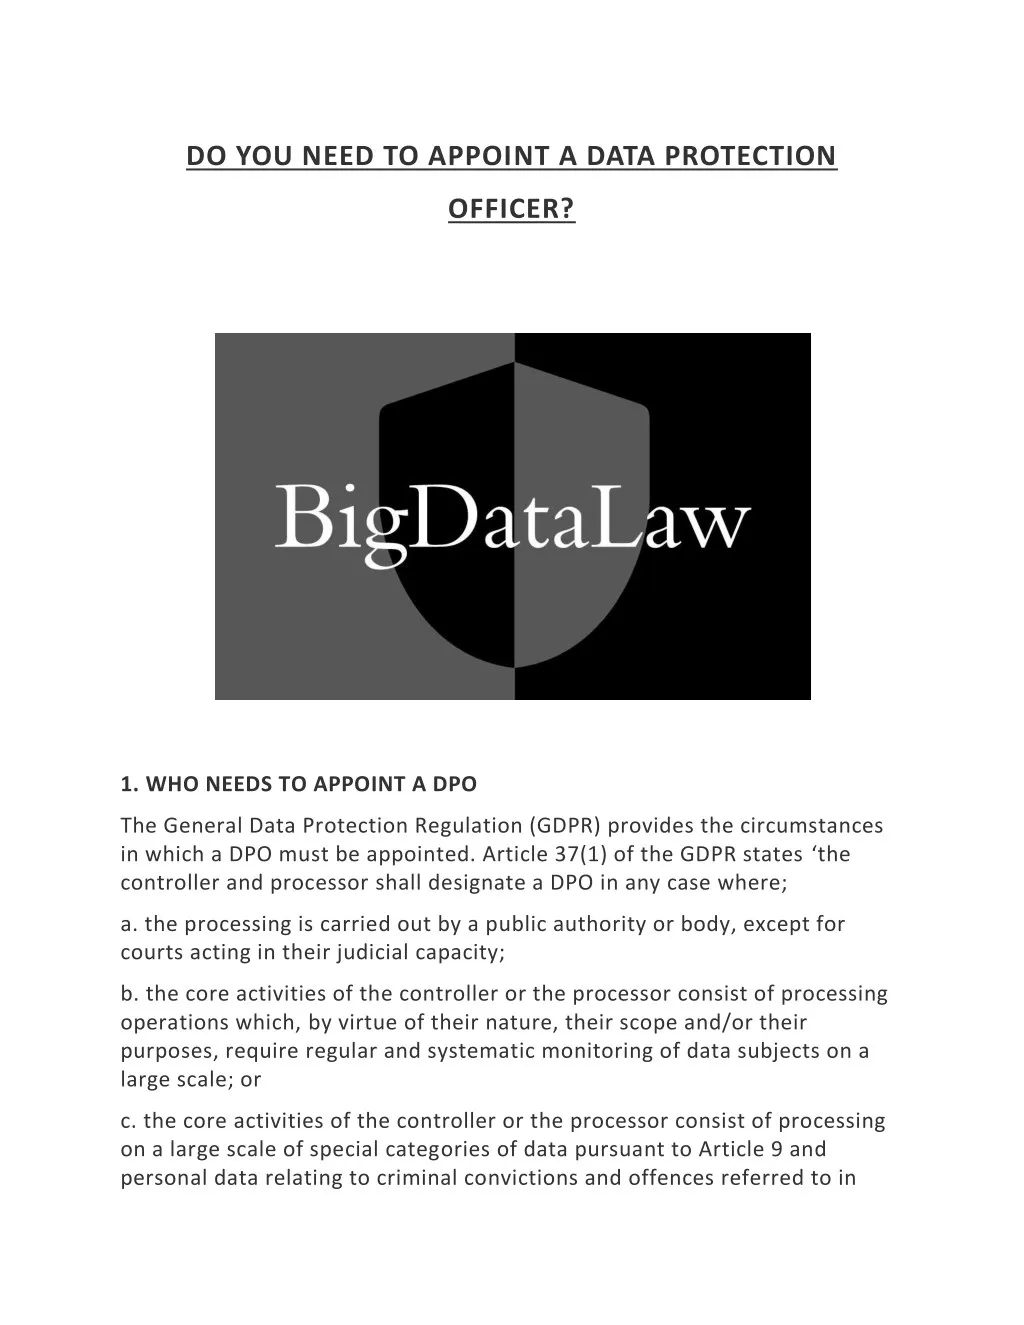 do you need to appoint a data protection